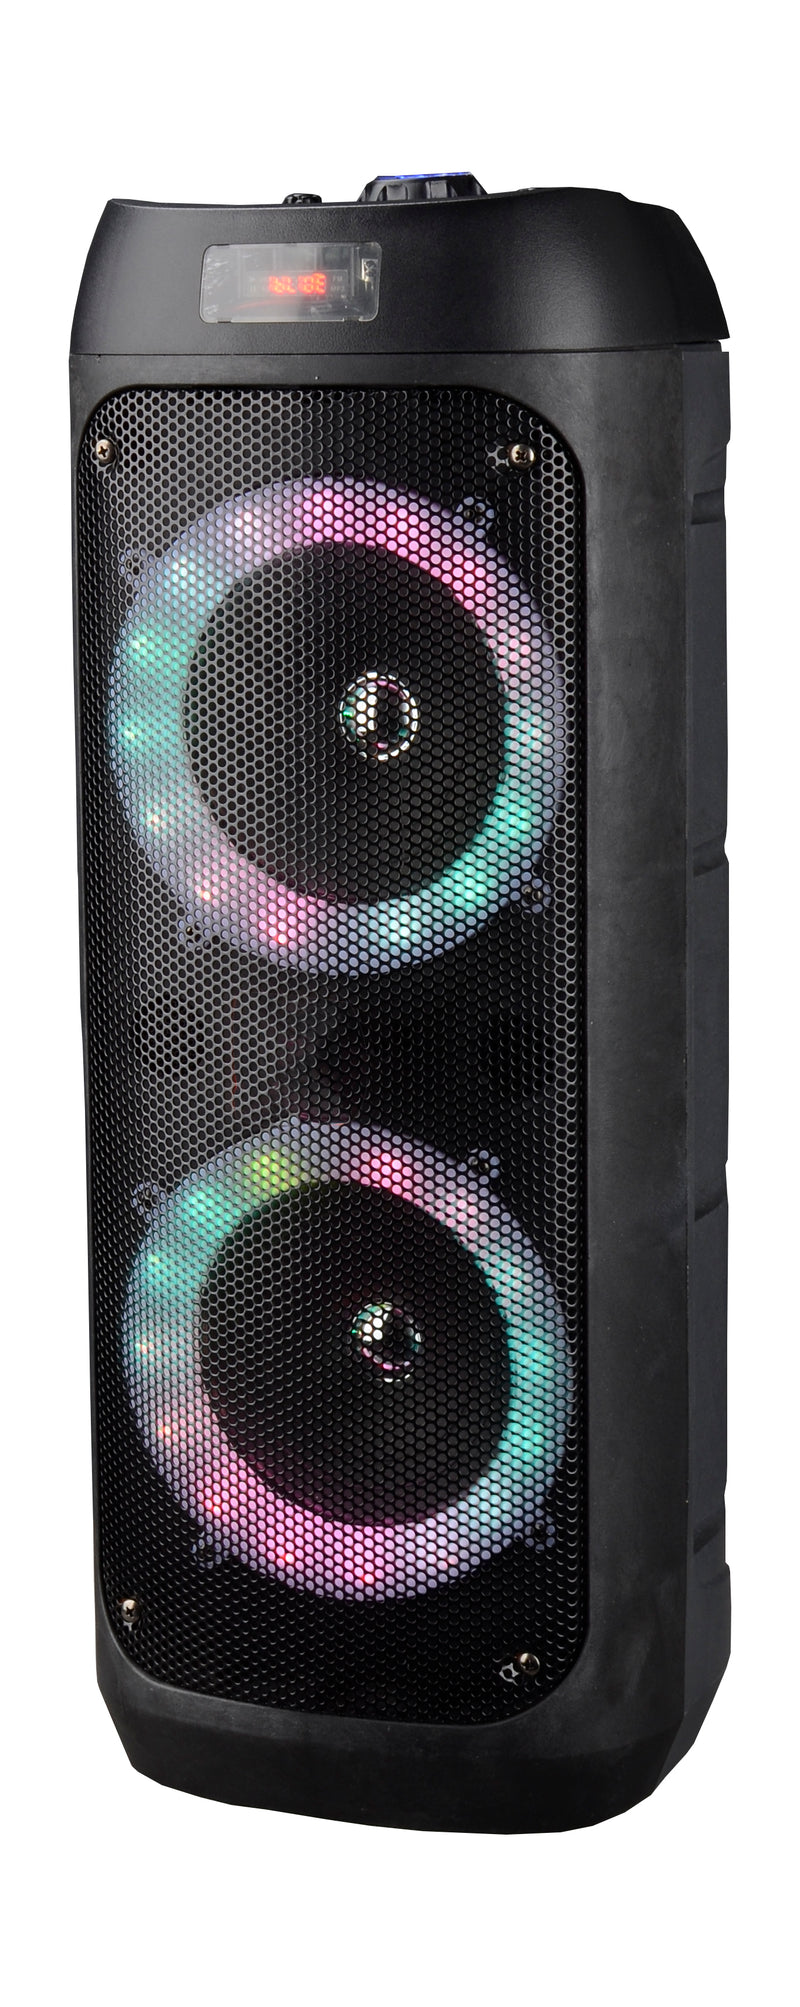 CH-815 ULTRA Max Power 8" x 2 Woofers High Power with LED lights around the woofer